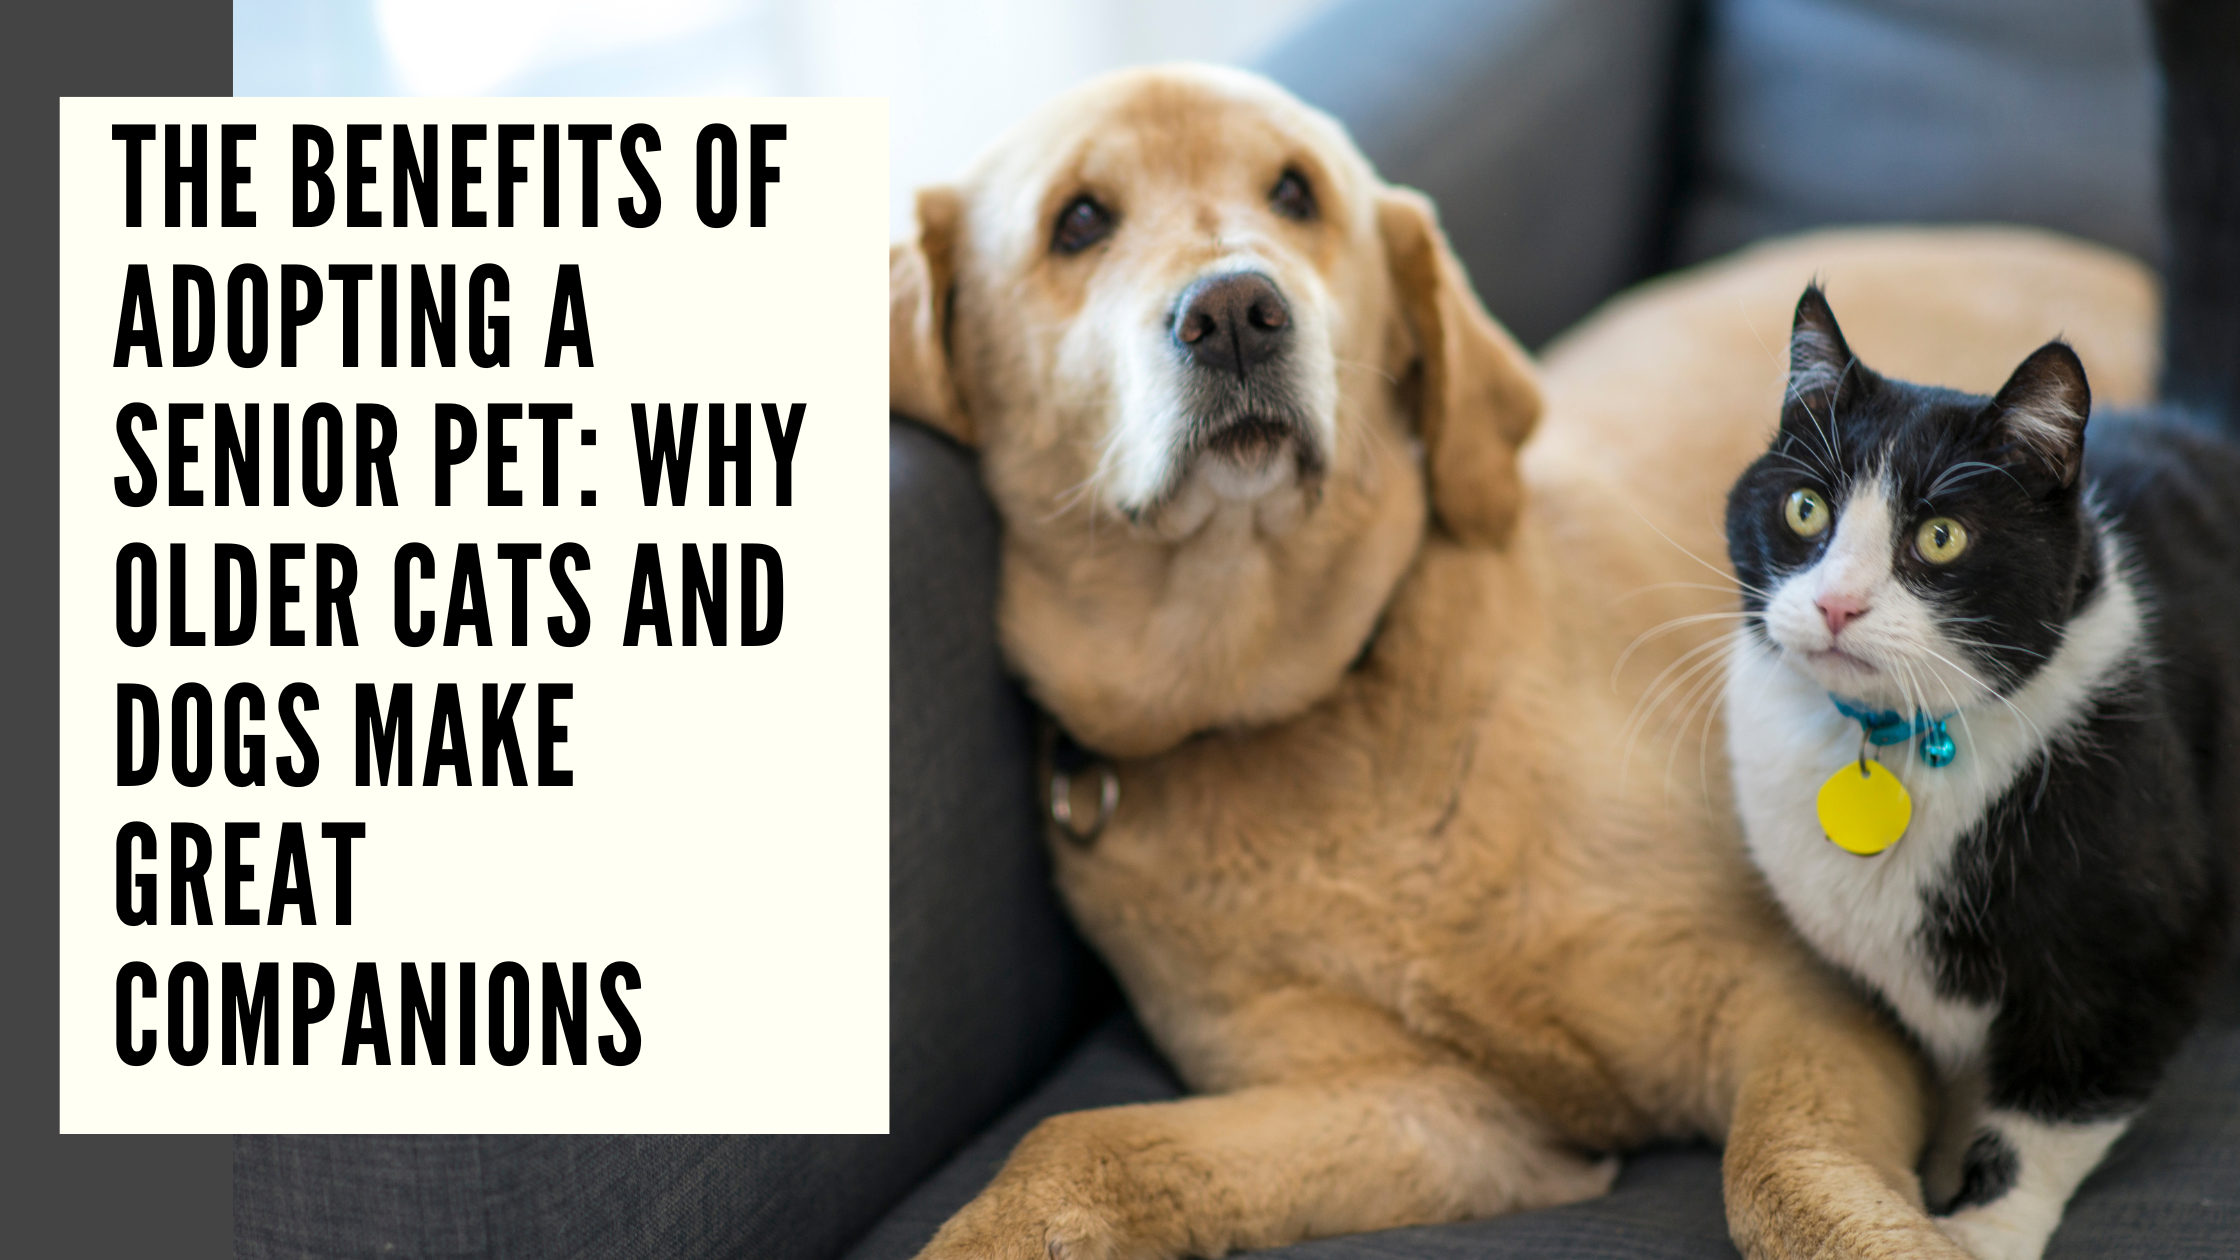 The Benefits of Adopting a Senior Pet Why Older Cats and Dogs Make Great Companions